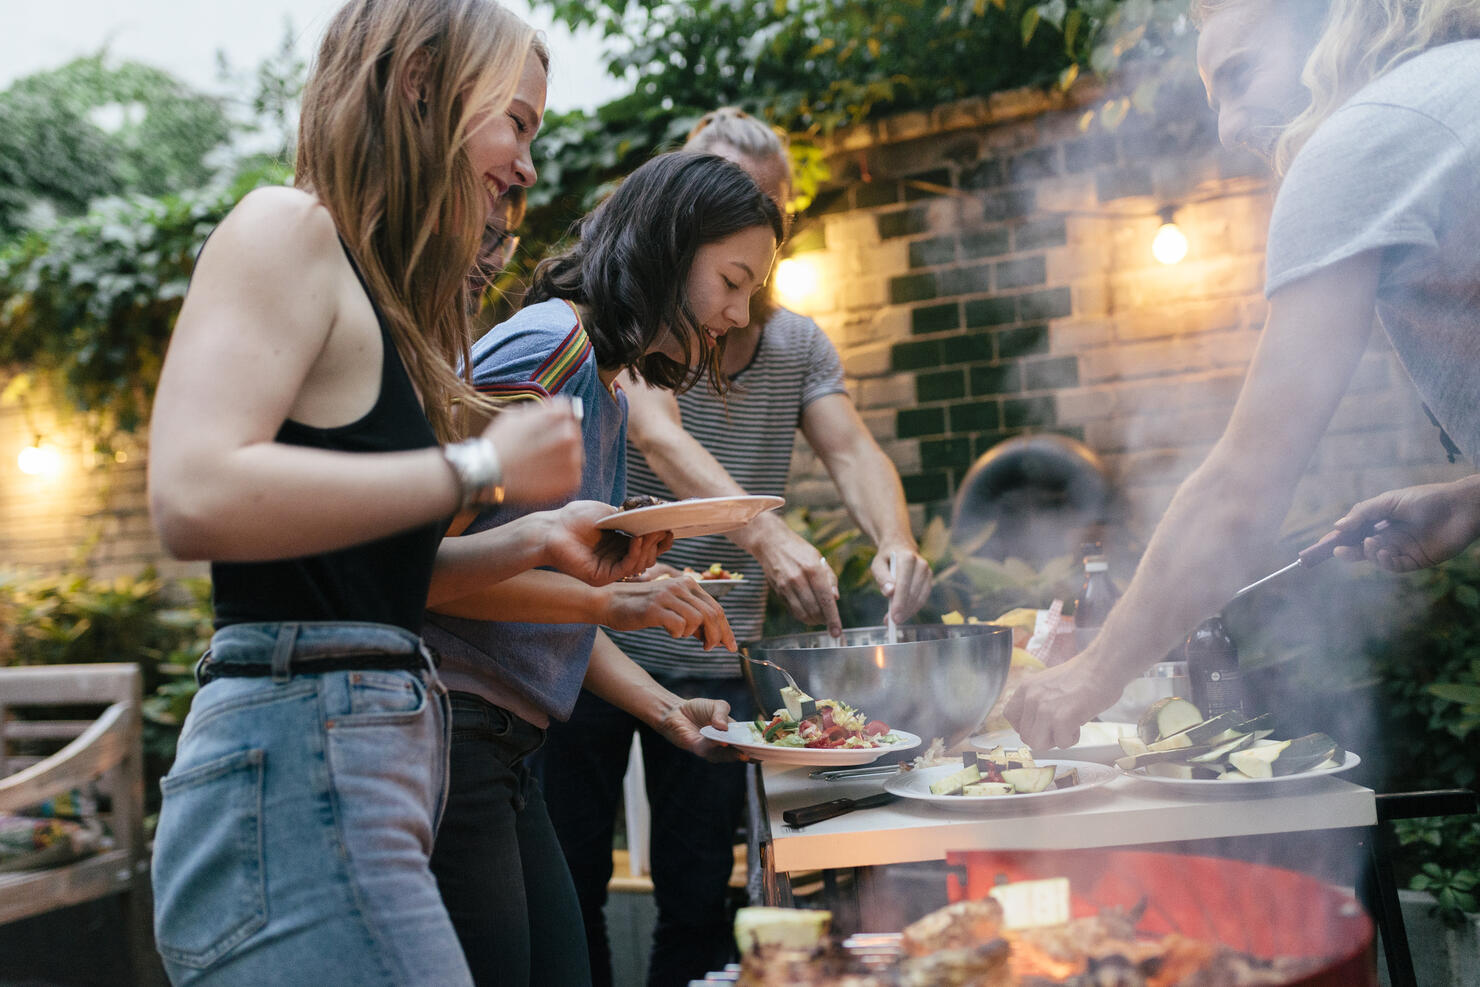 A Group Of Friends Helping Themselves To Food At A Summer Barbecue